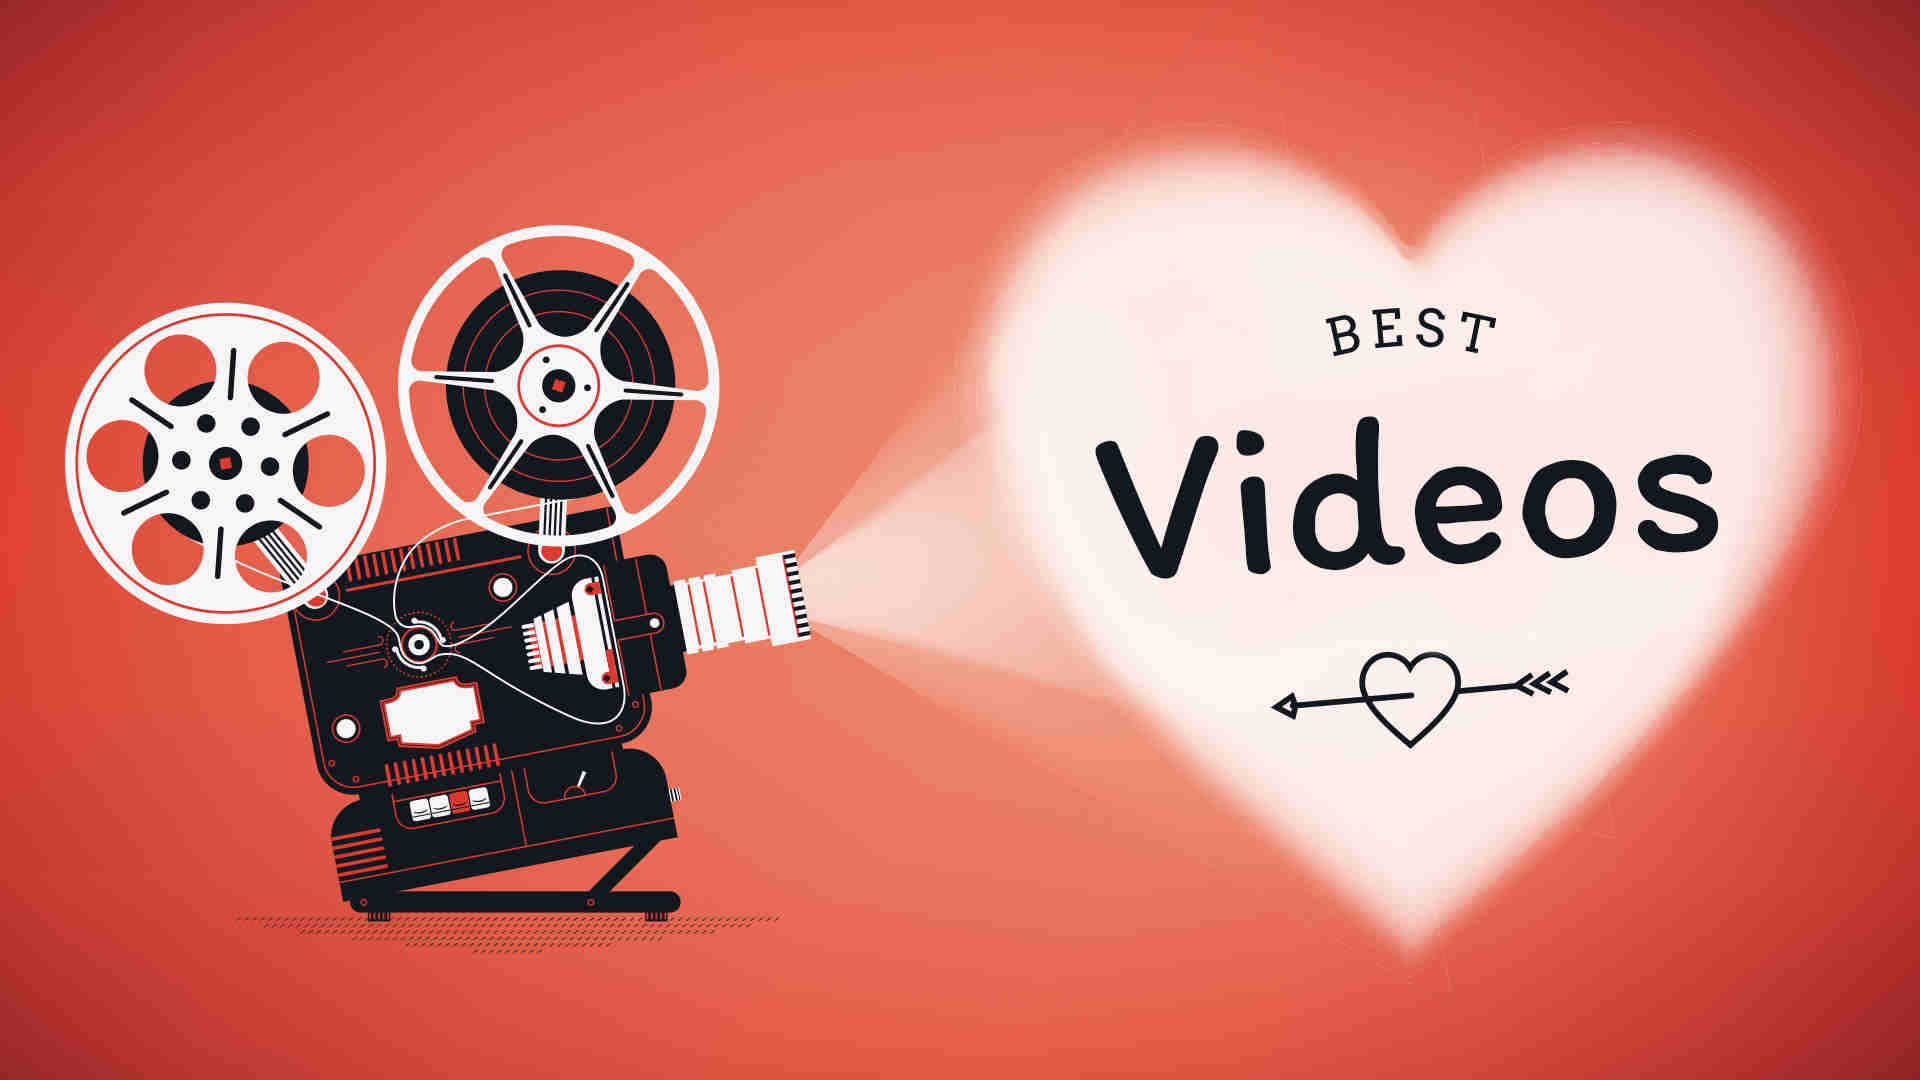 How best videos work for business